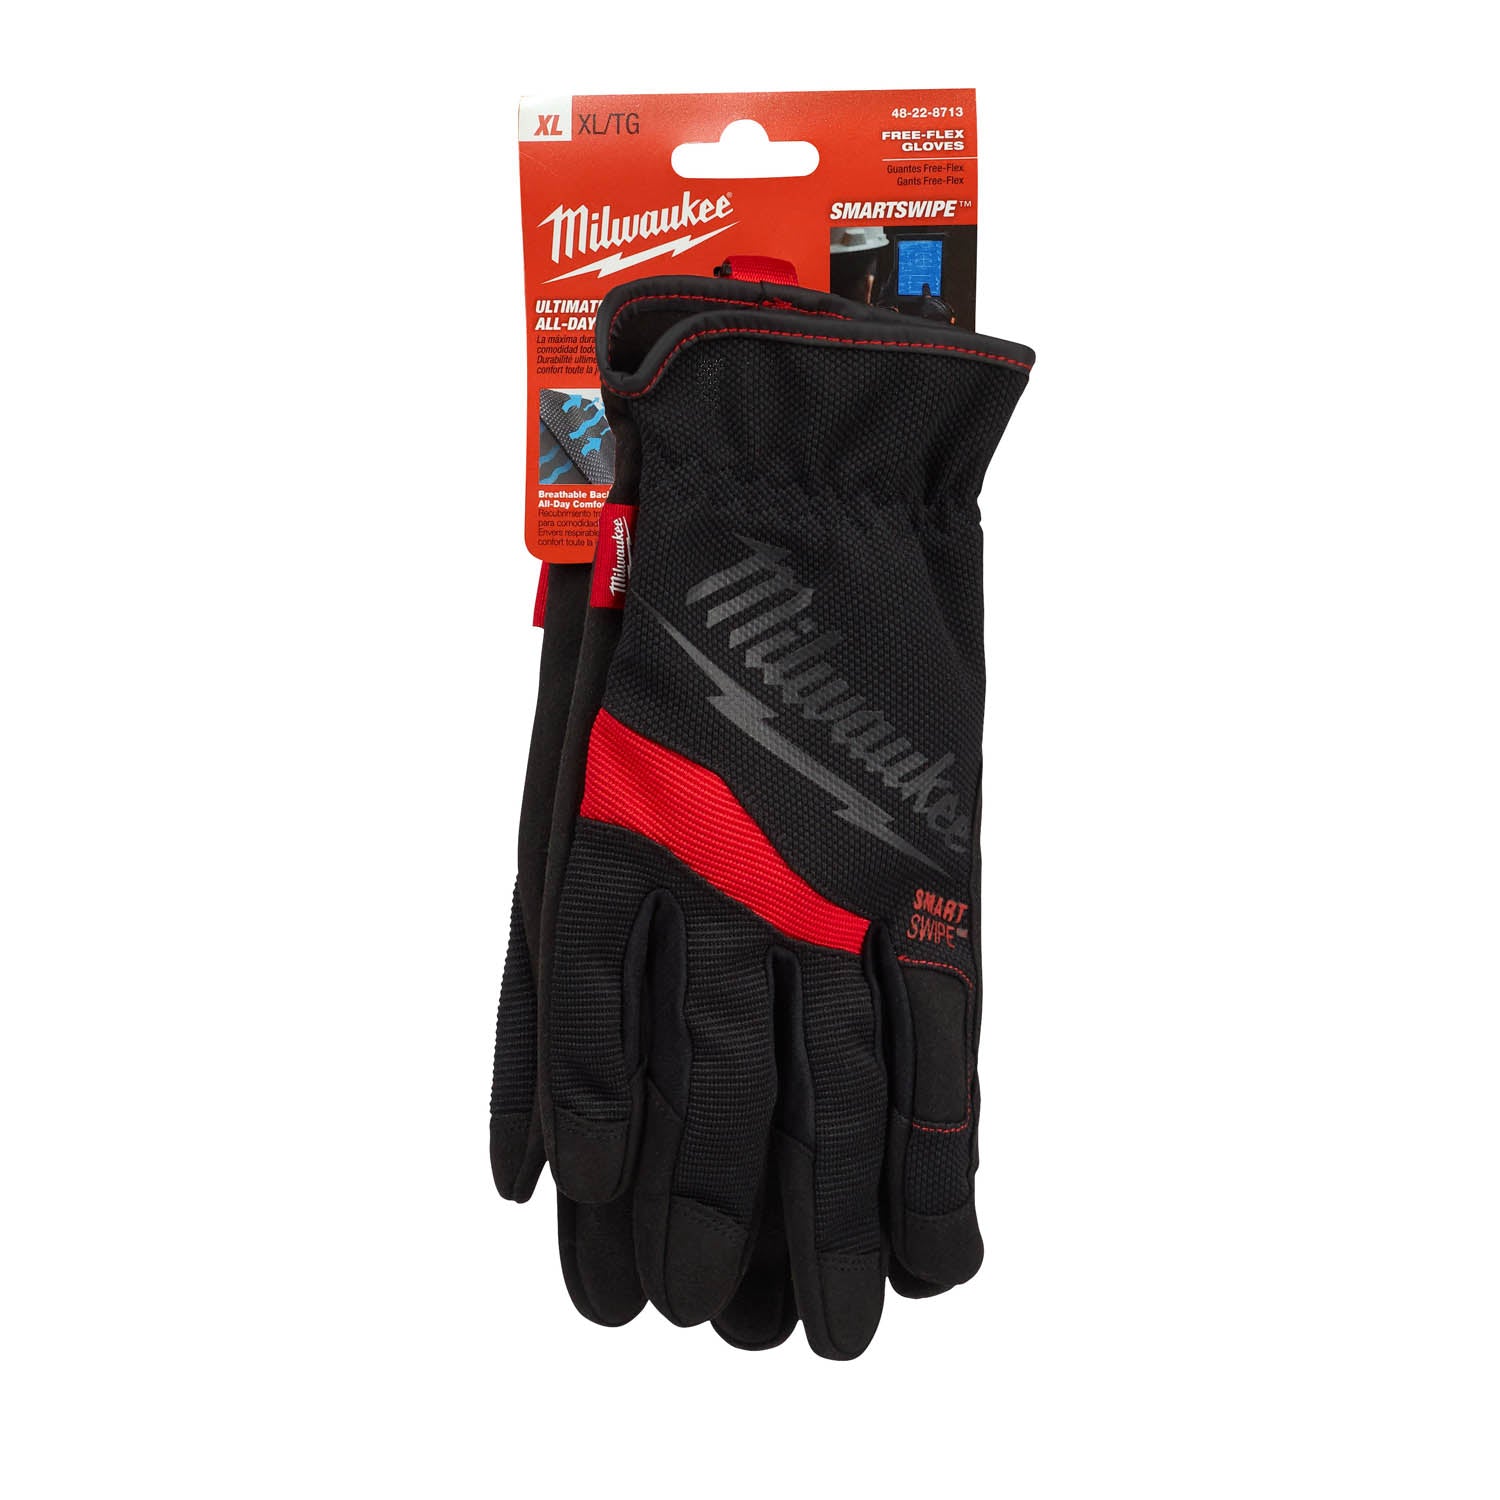 Milwaukee Promo Free-Flex Work Gloves (Large or X-Large) (Not For Individual Sale)